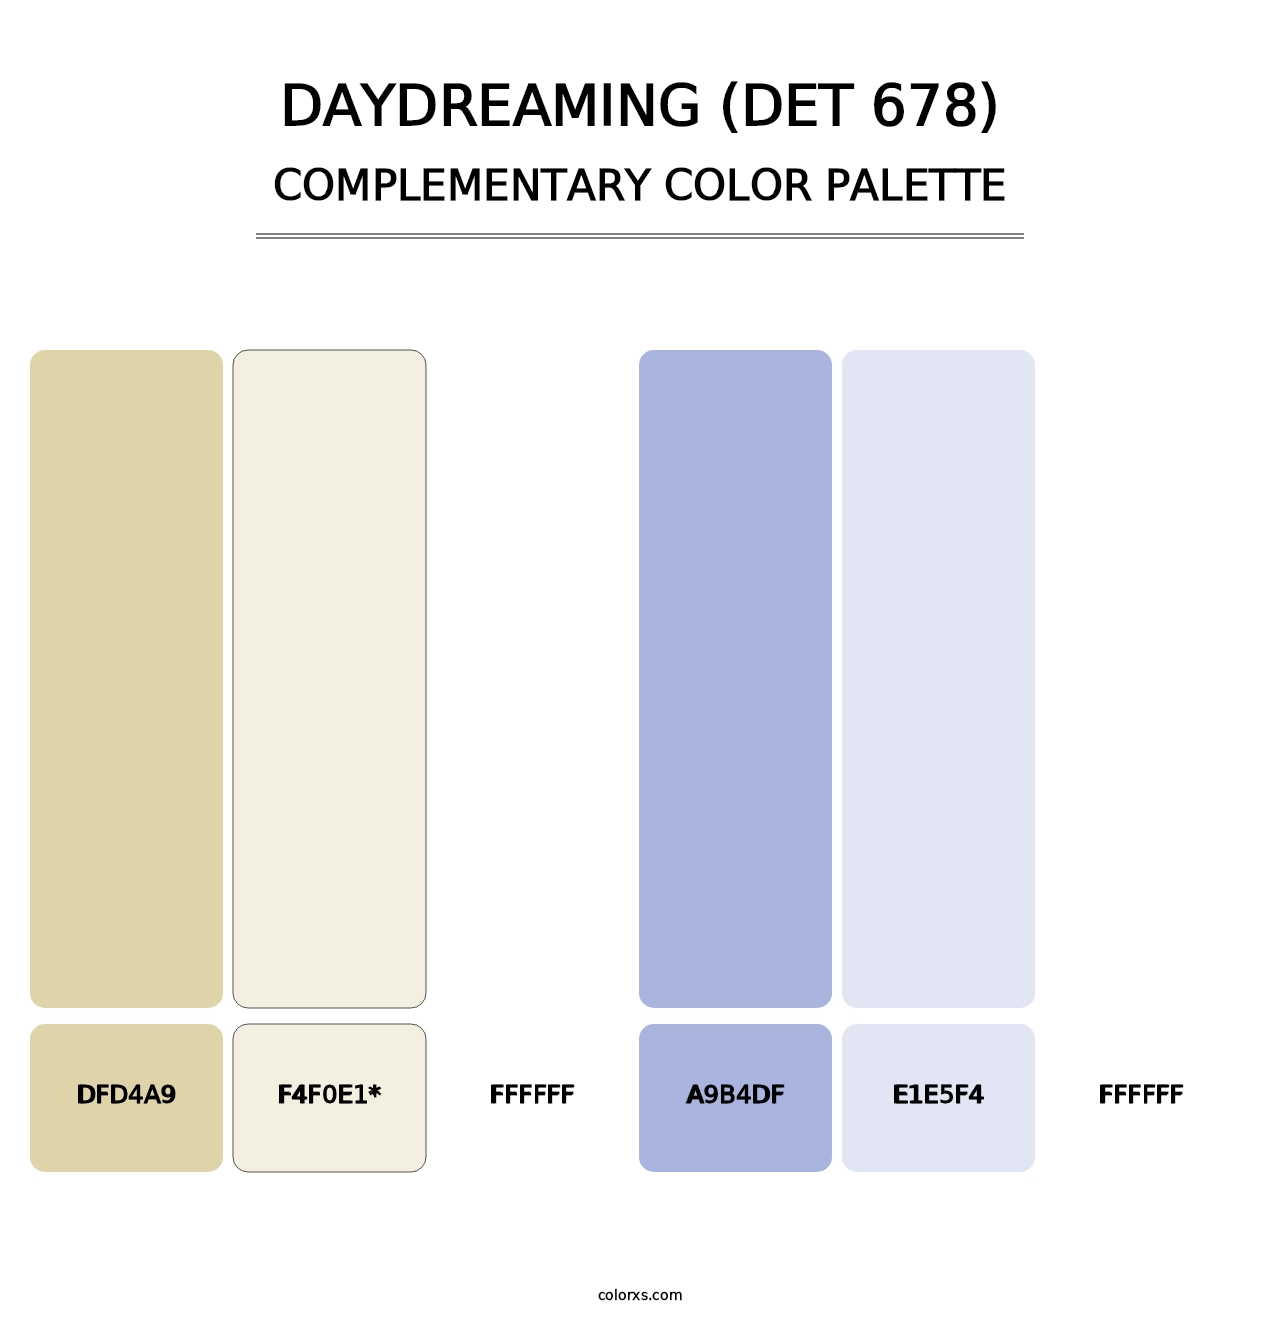 Daydreaming (DET 678) - Complementary Color Palette